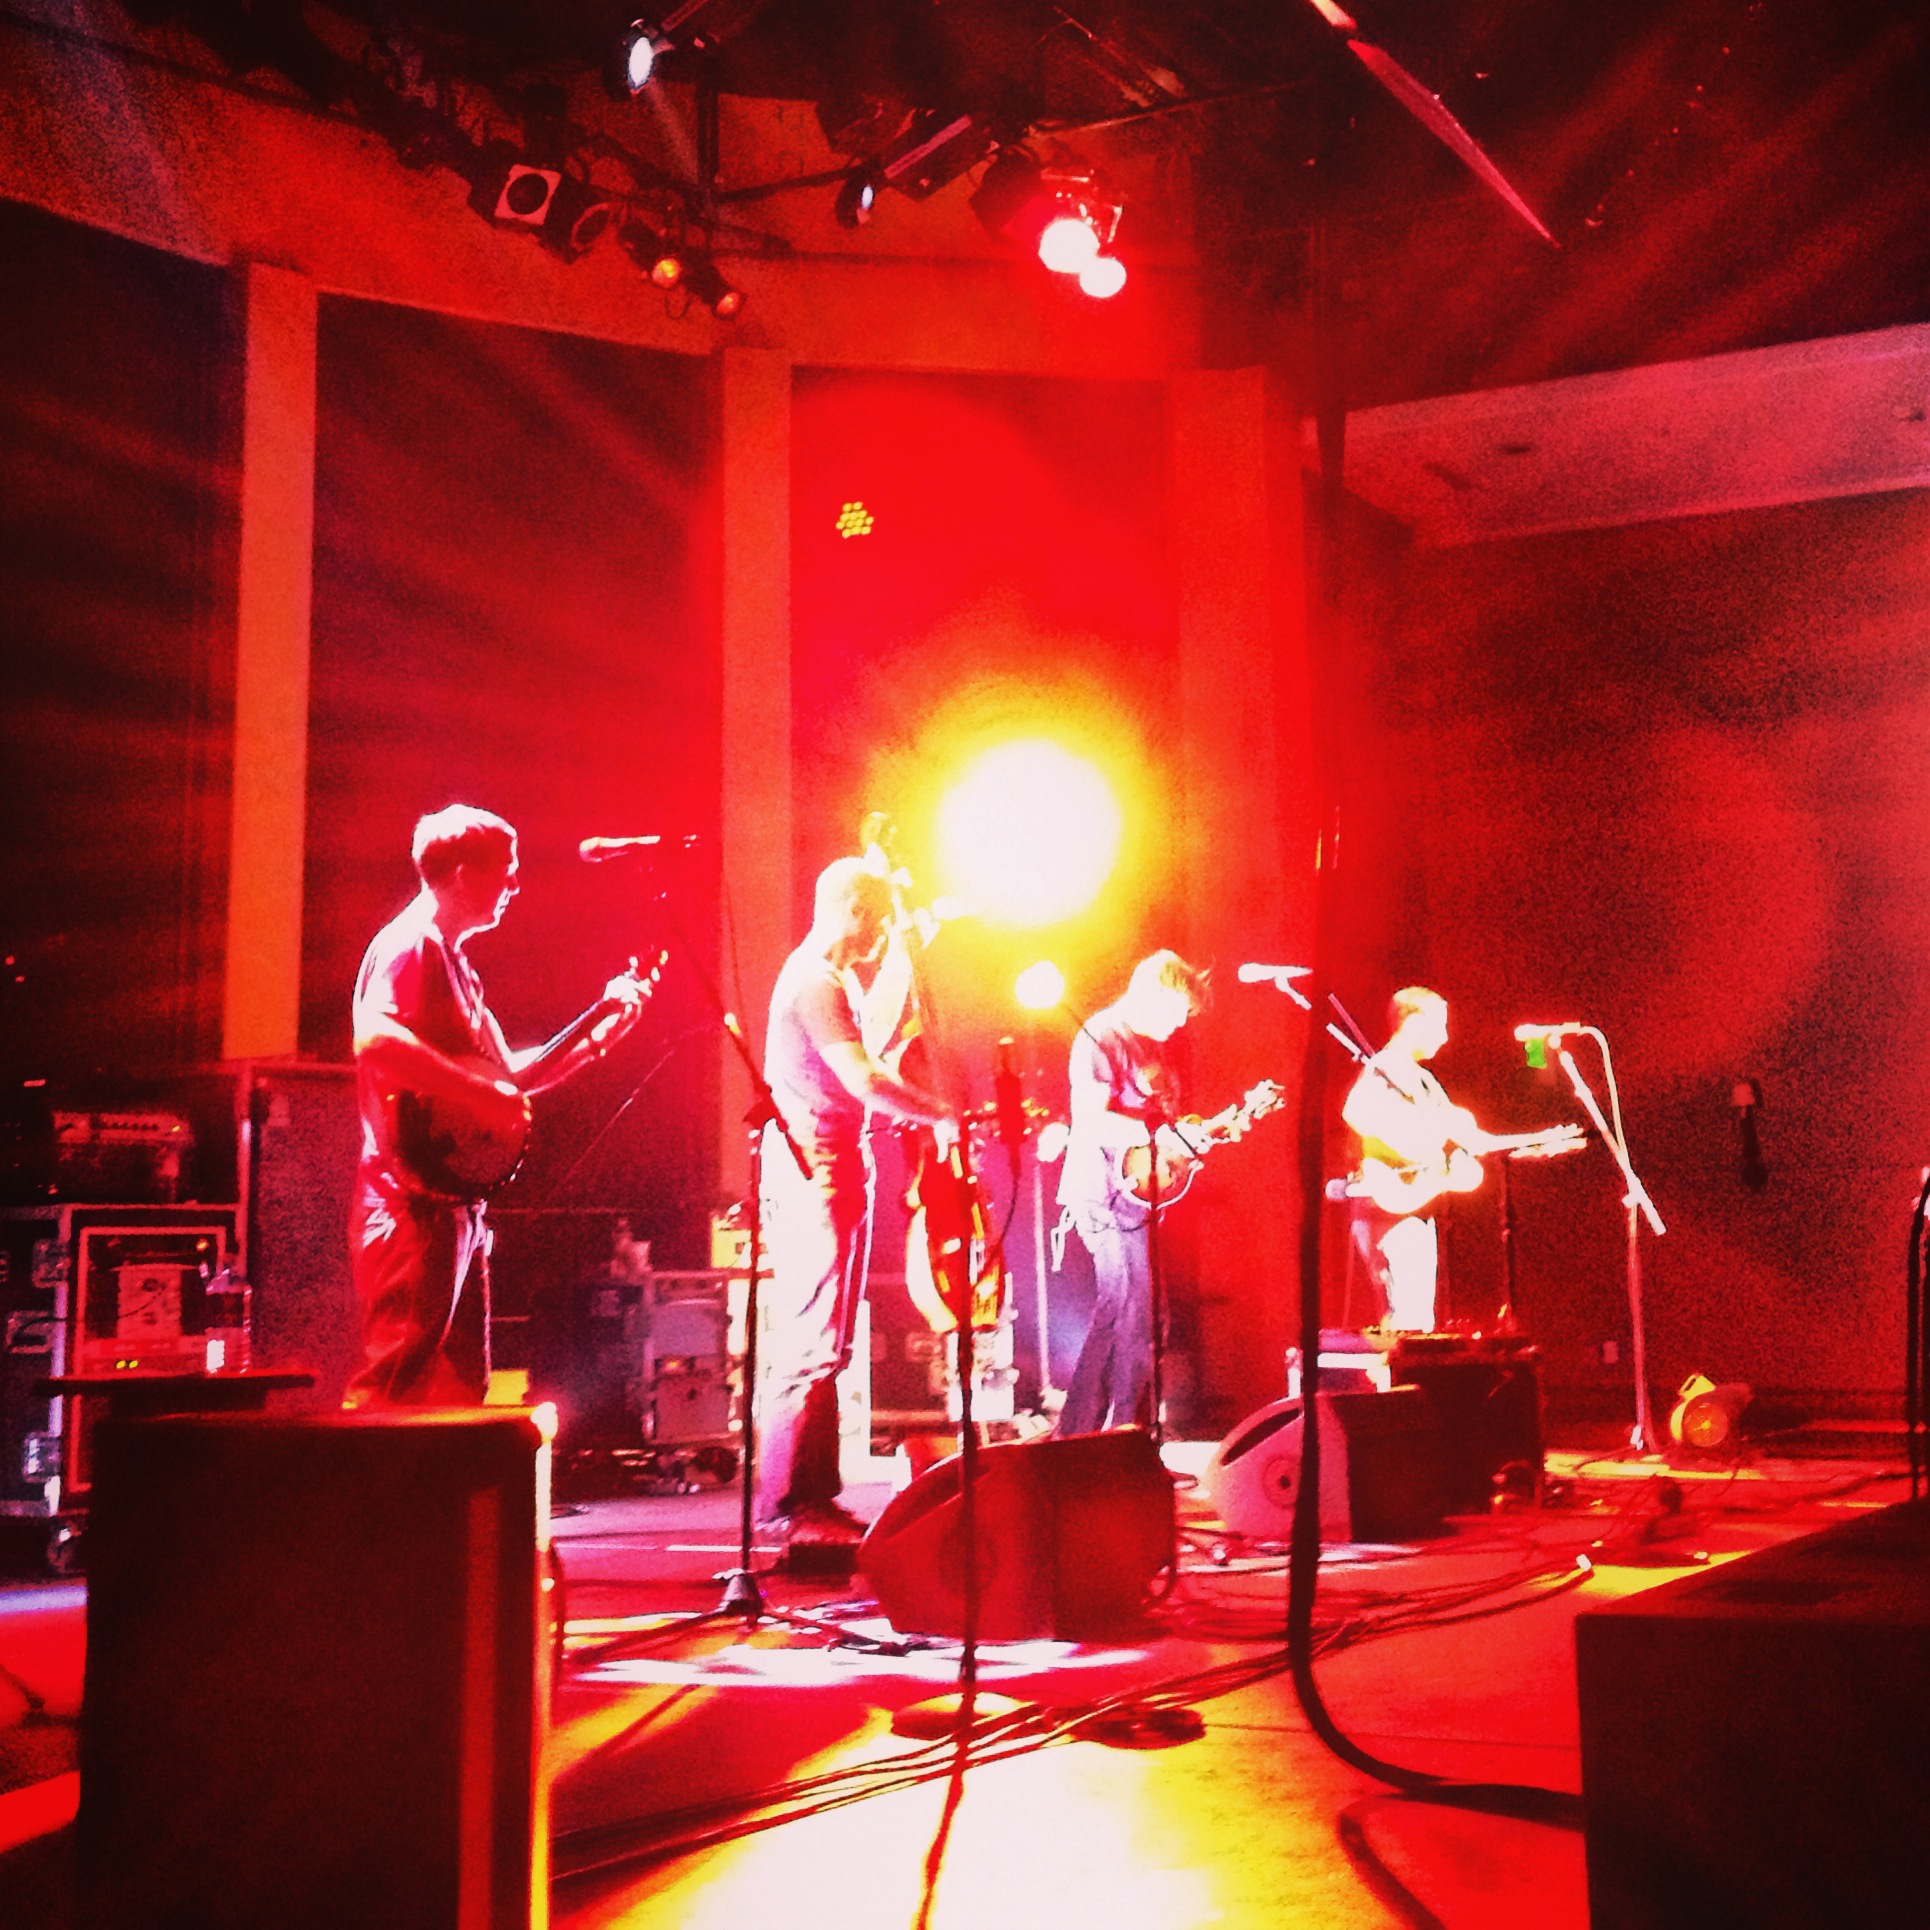 Yonder Mountain String Band at the Telluride Conference Center